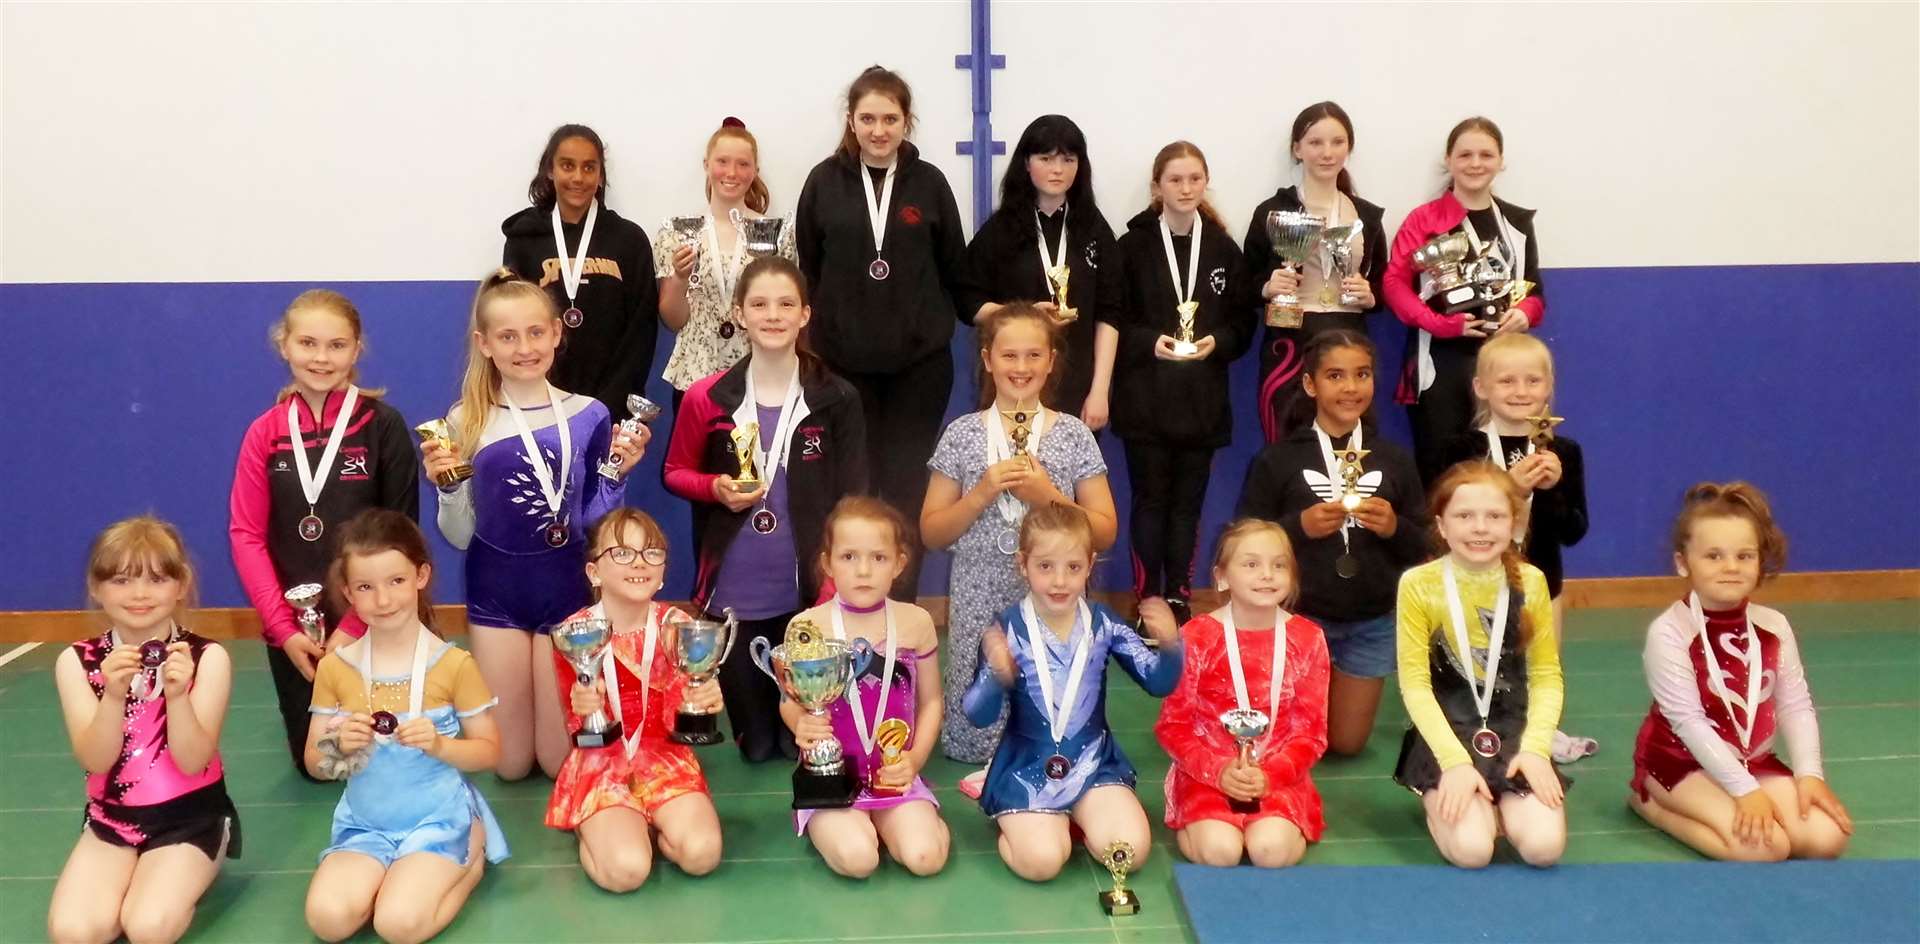 Awards were presented at the end of the display by Caithness Rhythmic Gymnastics.